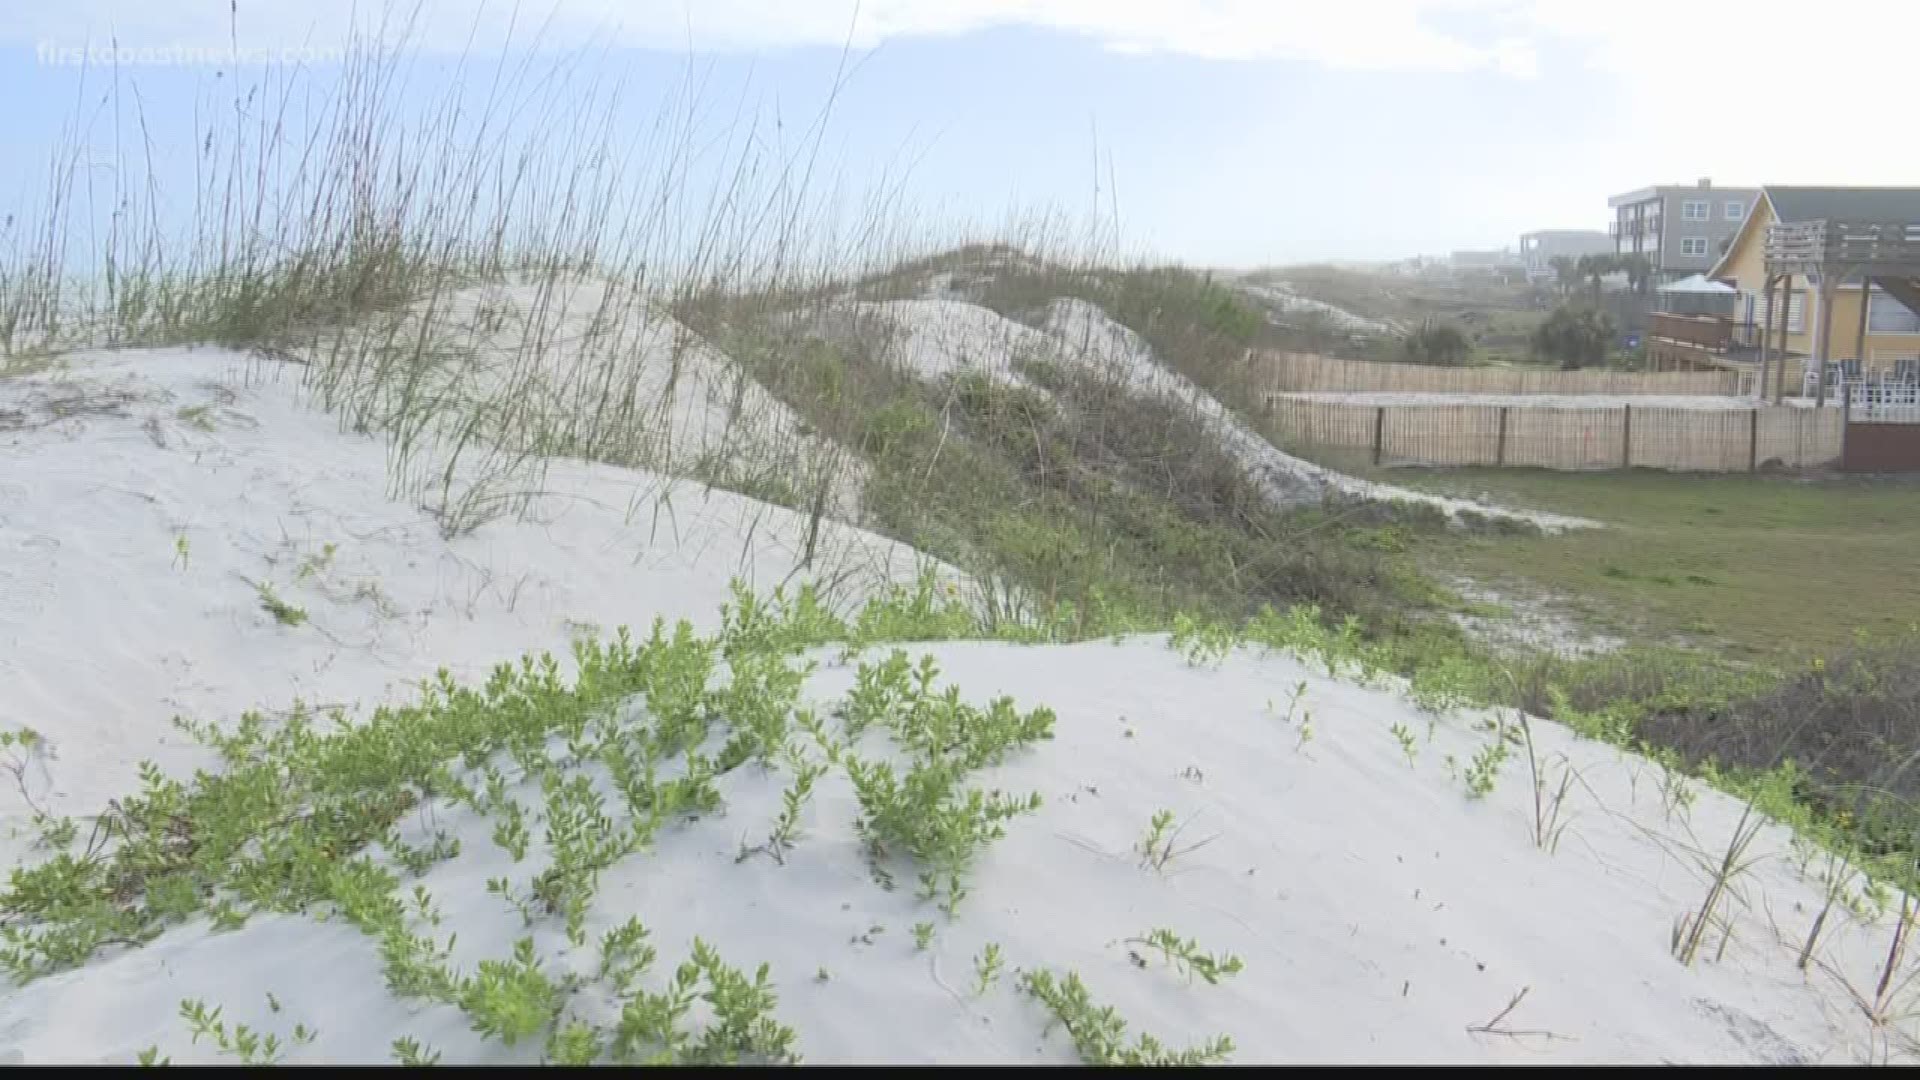 Signs along St. Augustine Beach state dunes can’t even be walked on, which is why many are confused as to how the dunes were allowed to be excavated.